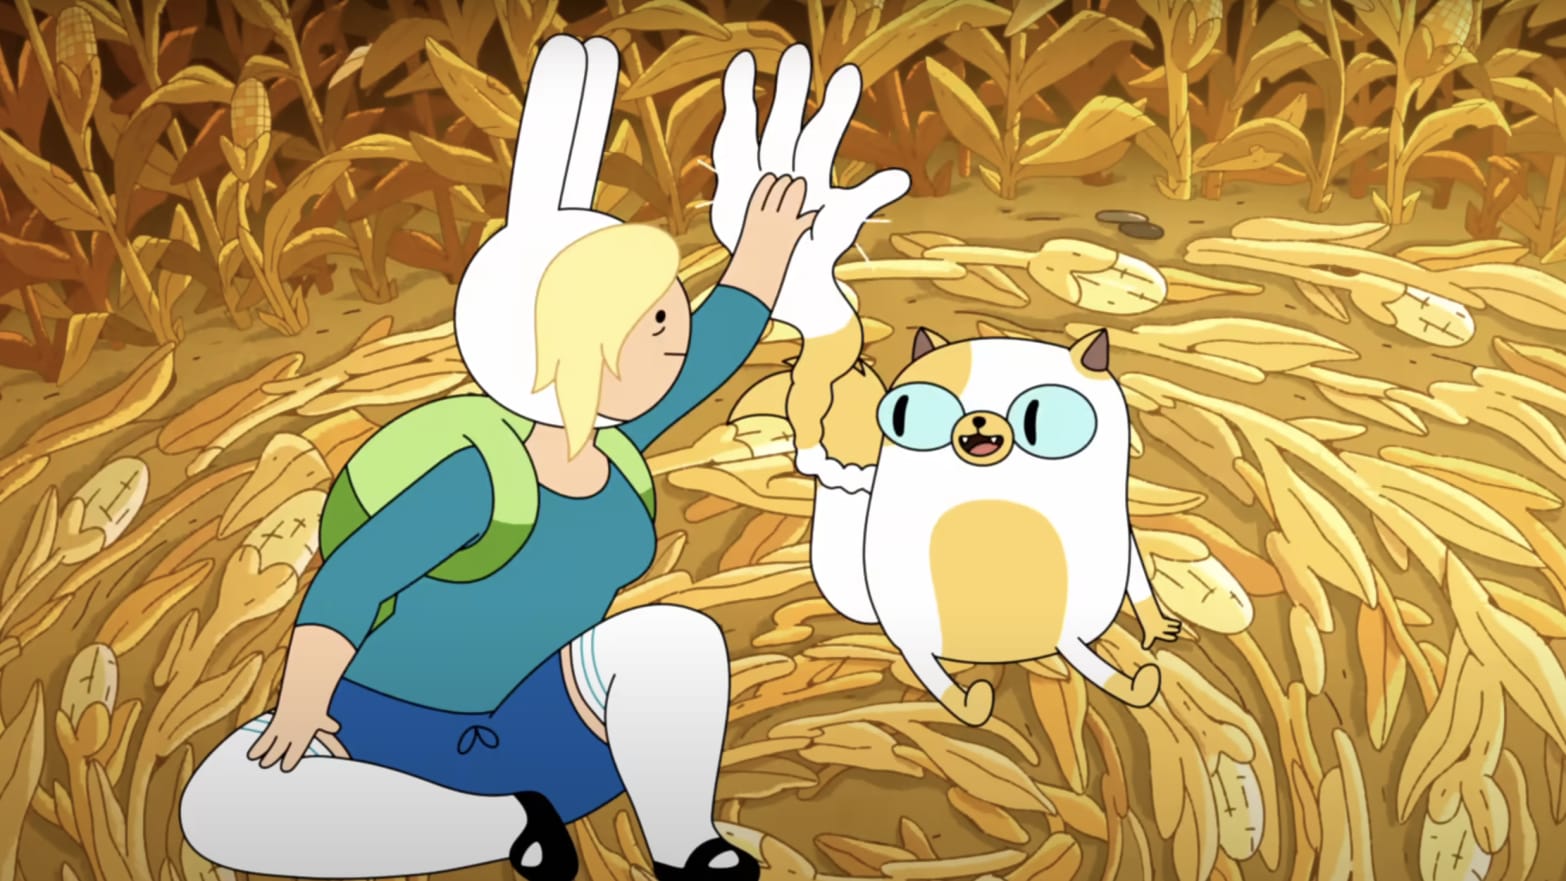 Fionna high-fives Cake in a still from their new show.